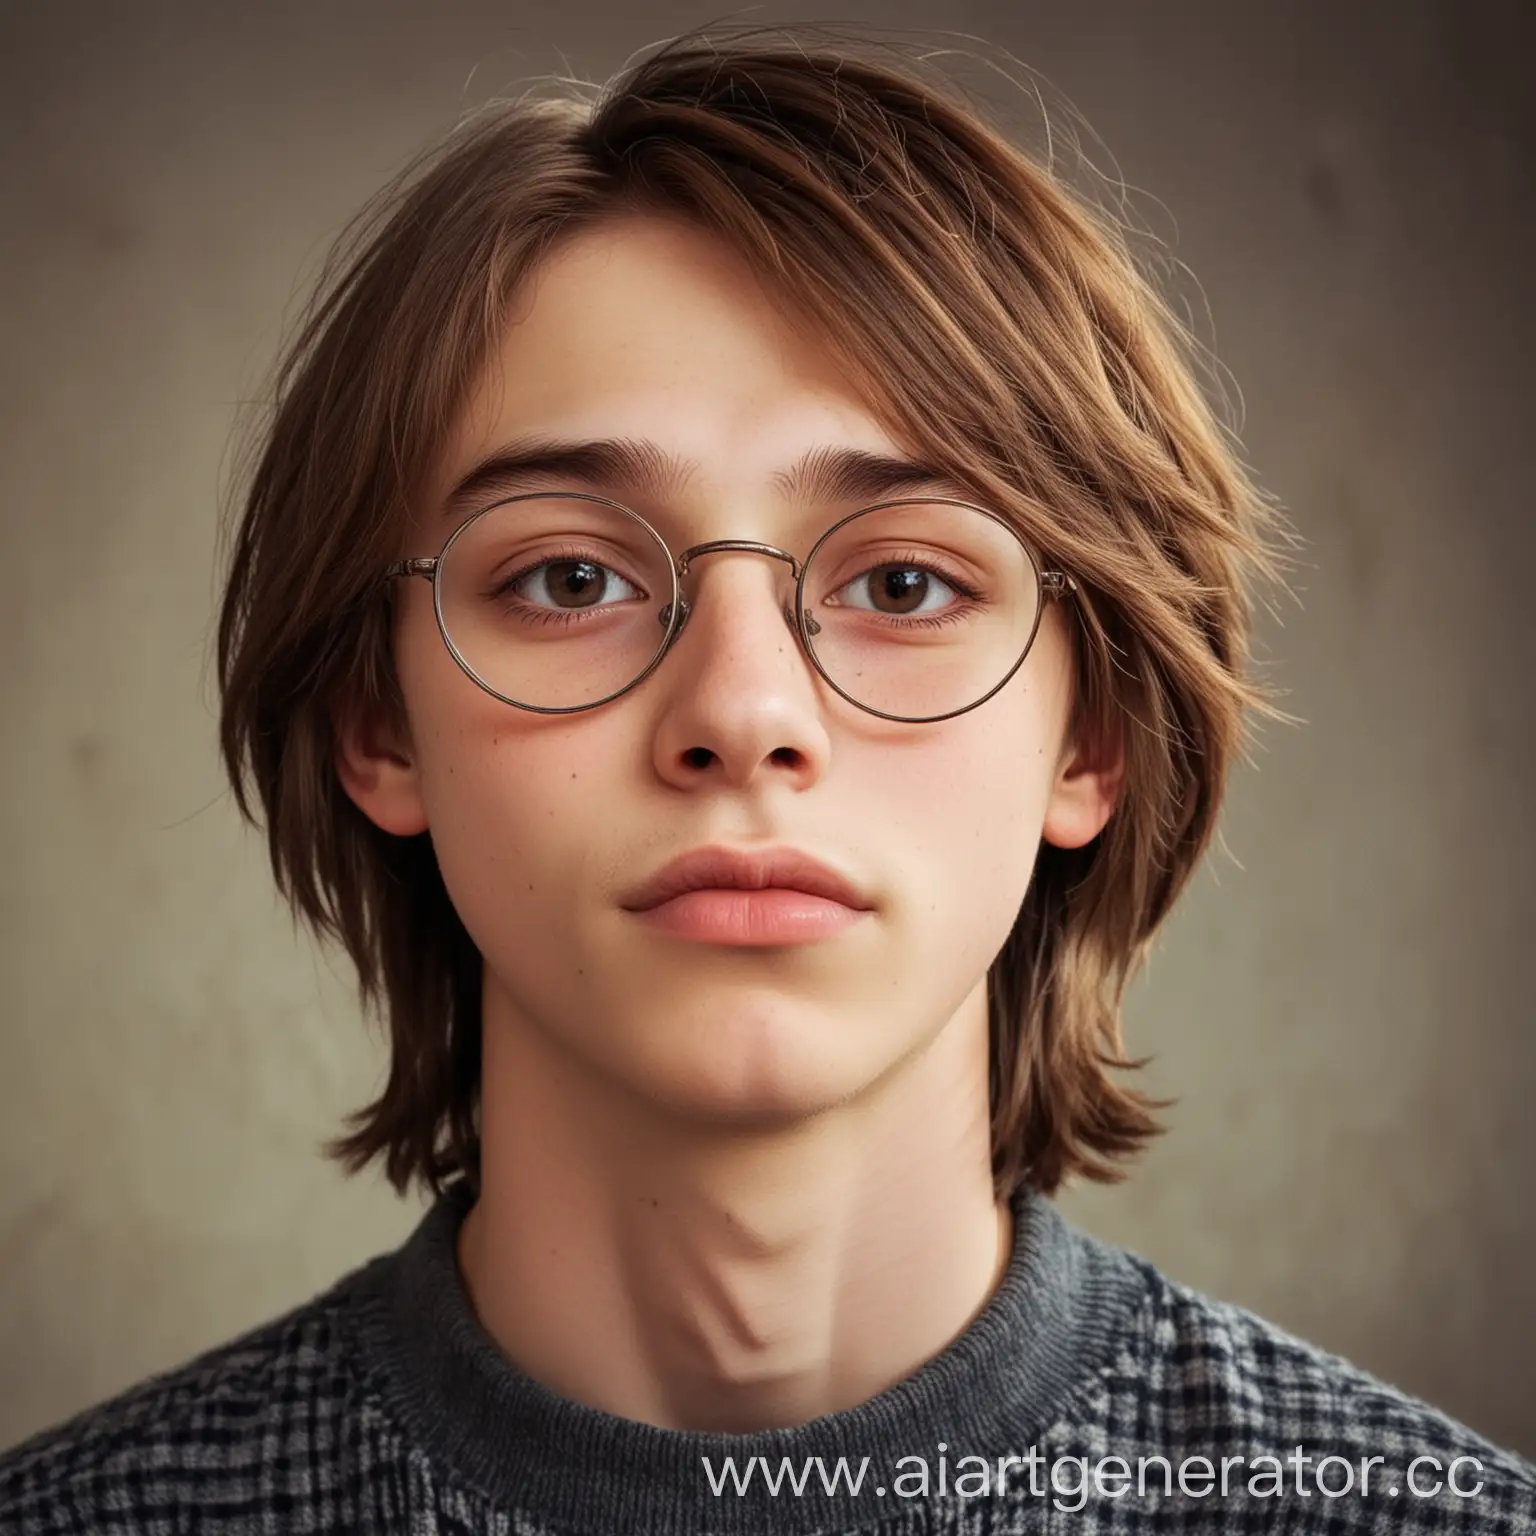 Portrait-of-a-SixteenYearOld-Boy-with-Chestnut-Hair-and-Round-Glasses